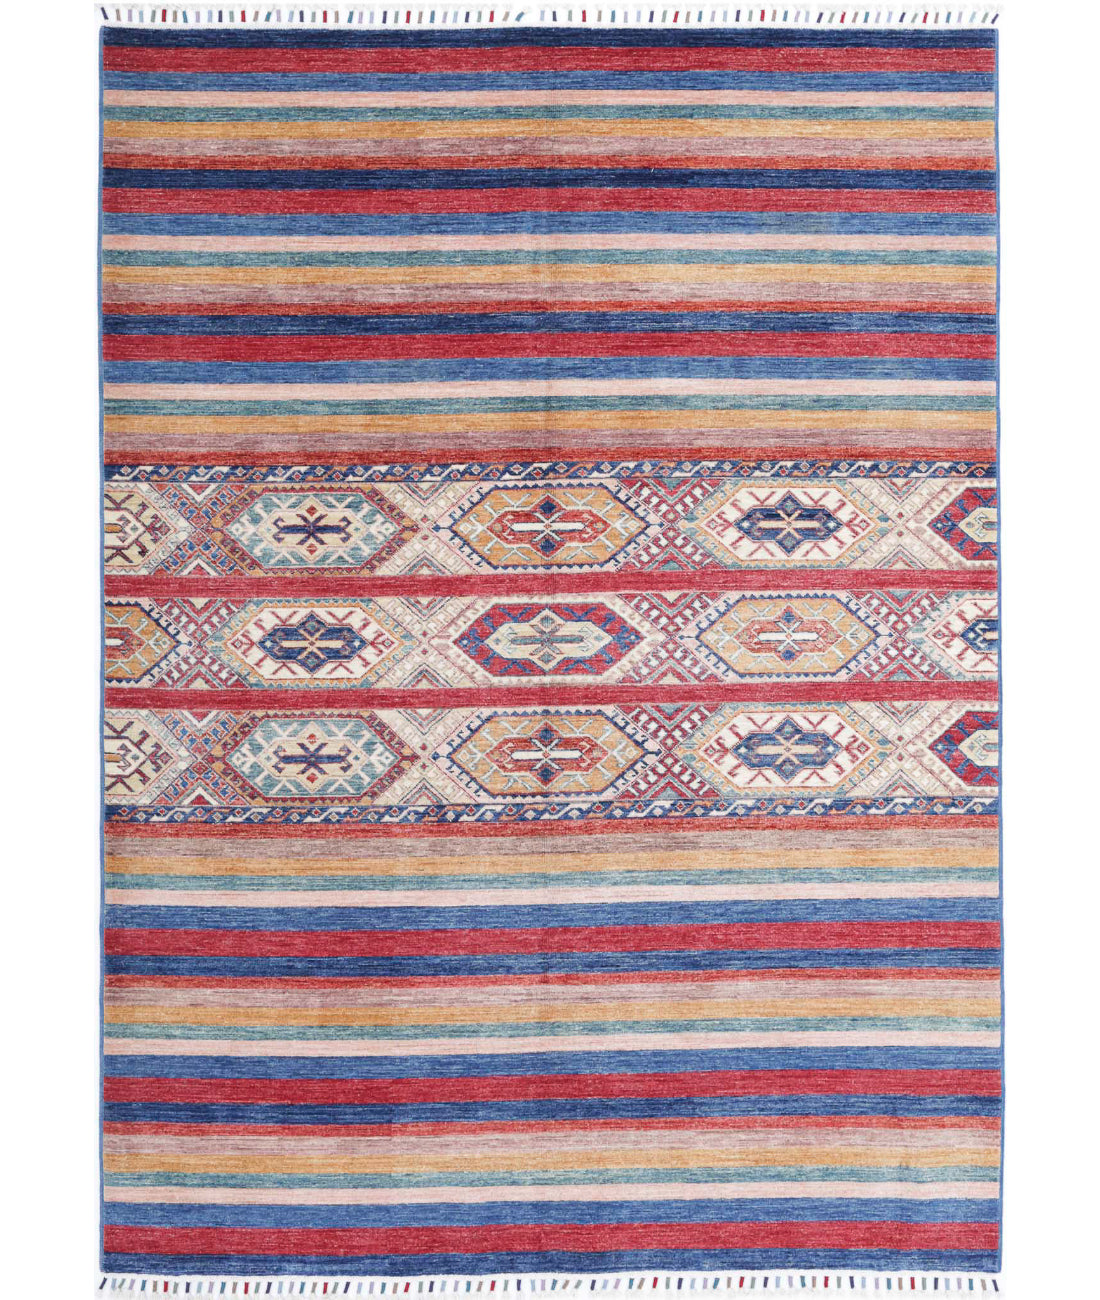 Hand Knotted Khurjeen Wool Rug - 5'7'' x 7'10'' 5'7'' x 7'10'' (168 X 235) / Multi / Blue